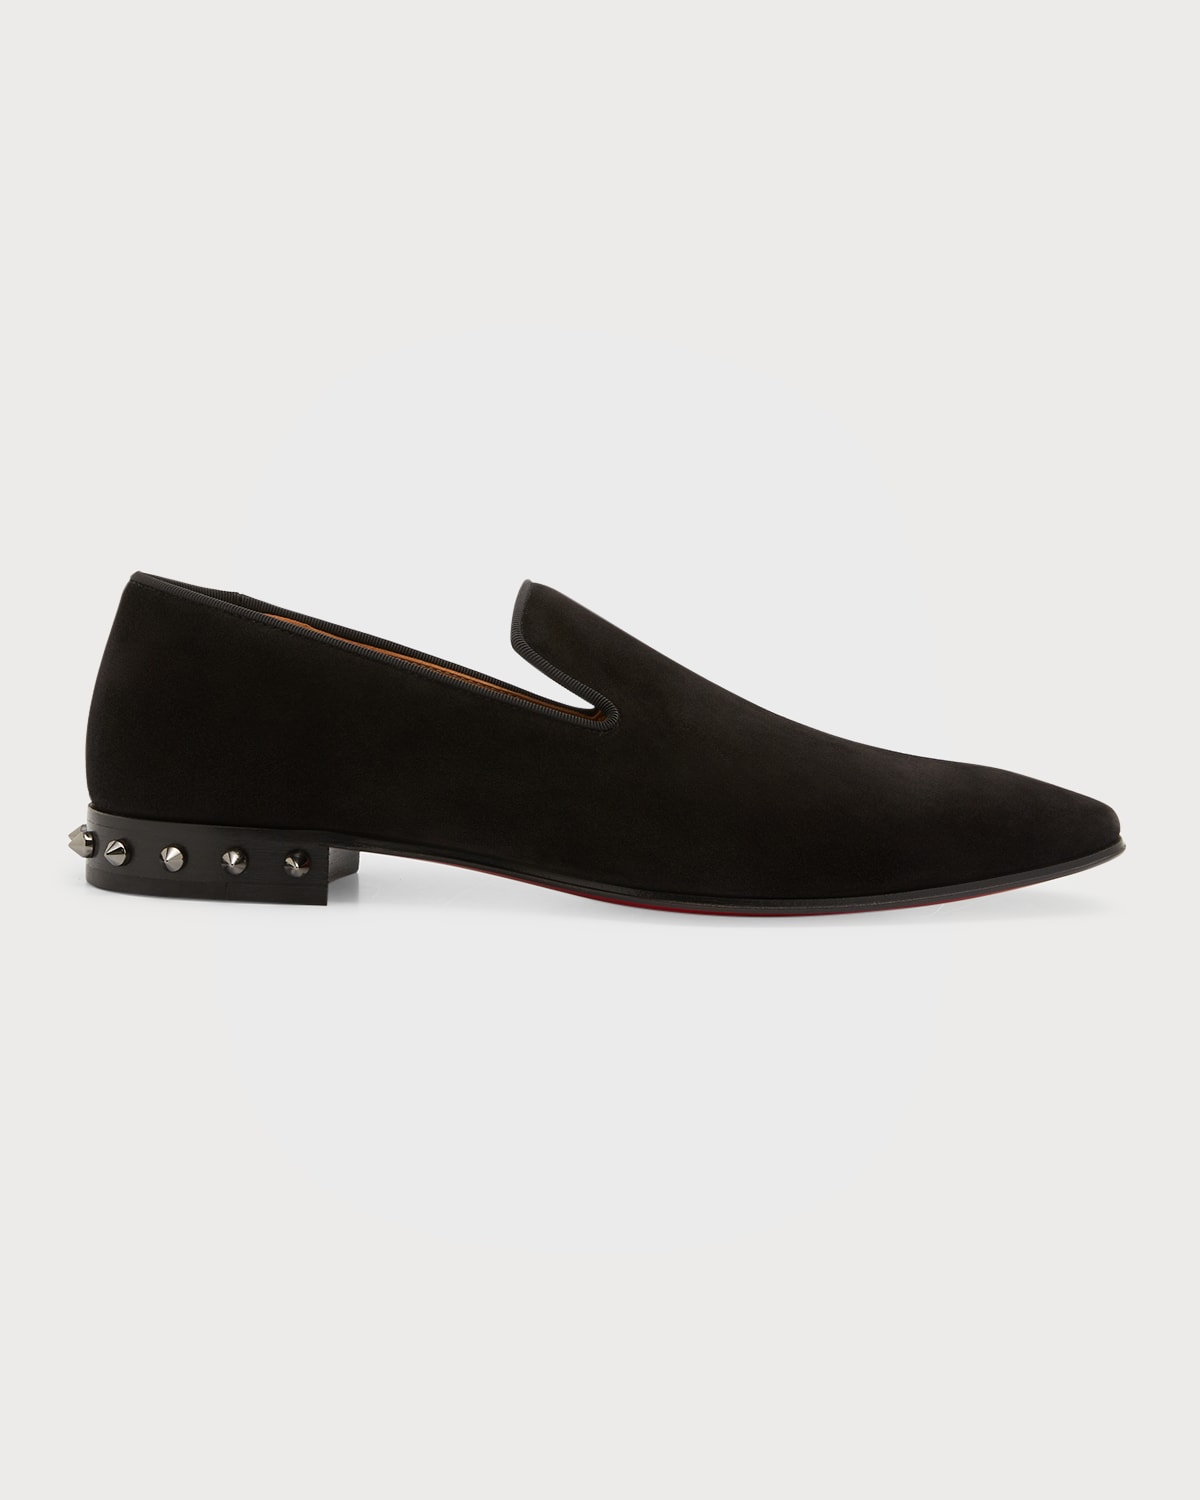 Christian Louboutin Men's Equiswing Spike Strap Loafers | Neiman Marcus